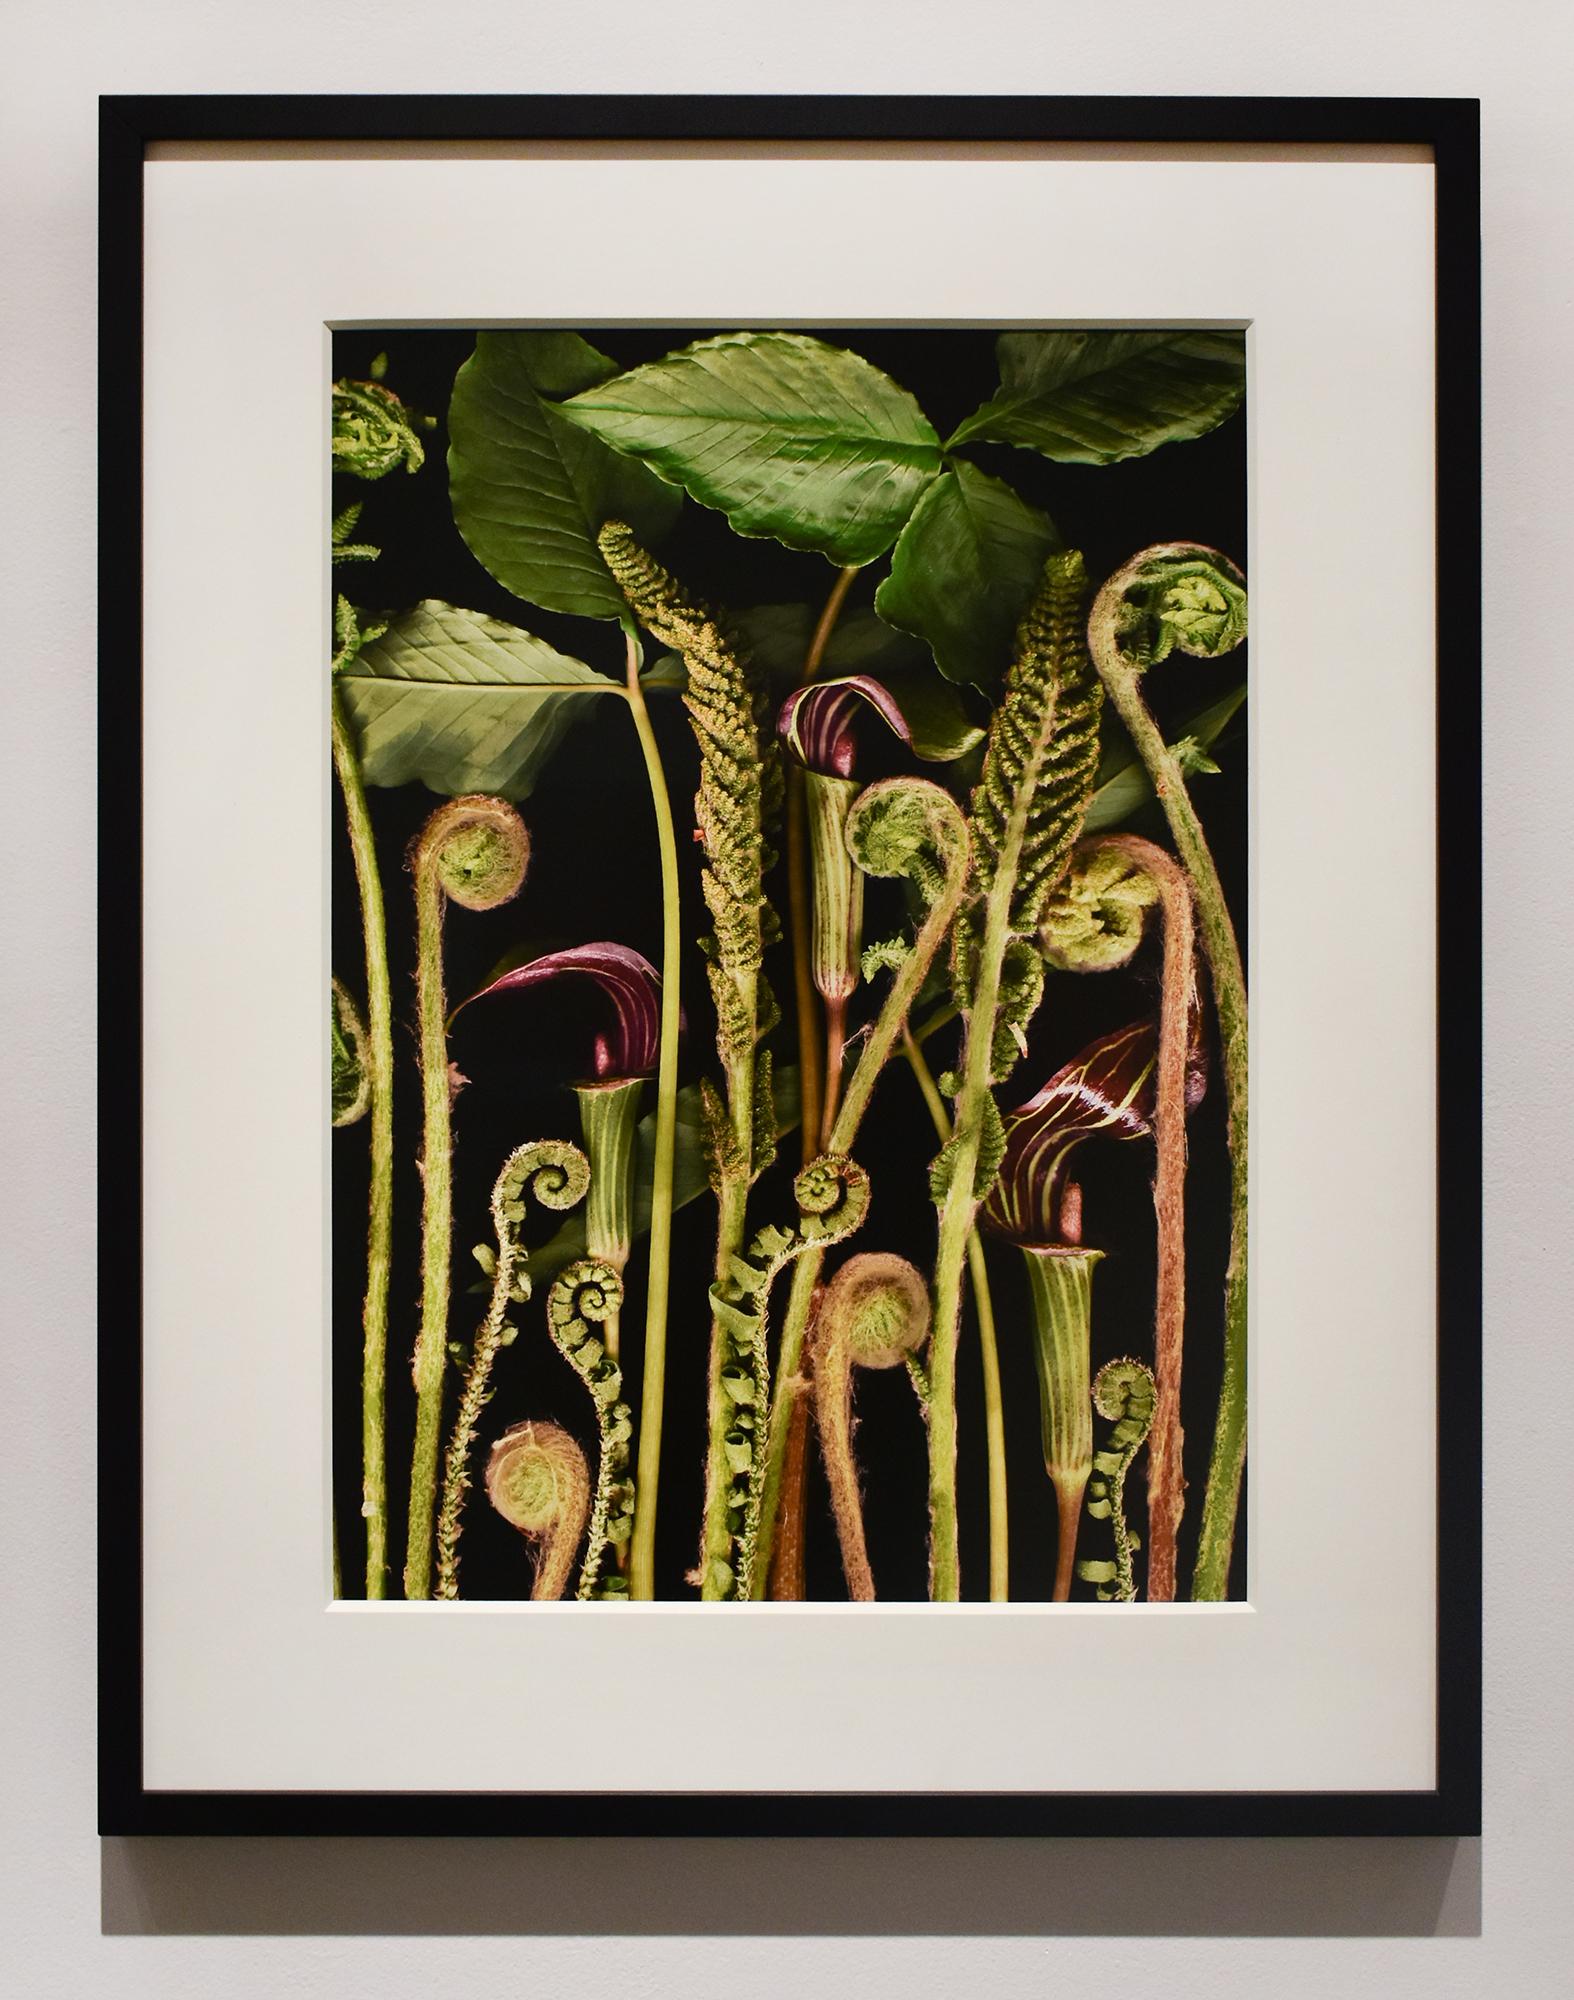 Archival digital scanograph
18 x 13 inches, edition of 225
24.5 x 19.5 inches in black frame with 8-ply white mat and non-glare glass

This contemporary, archival digital scanograph was made by fine art photographer, Lisa Frank, in 2007. The floral